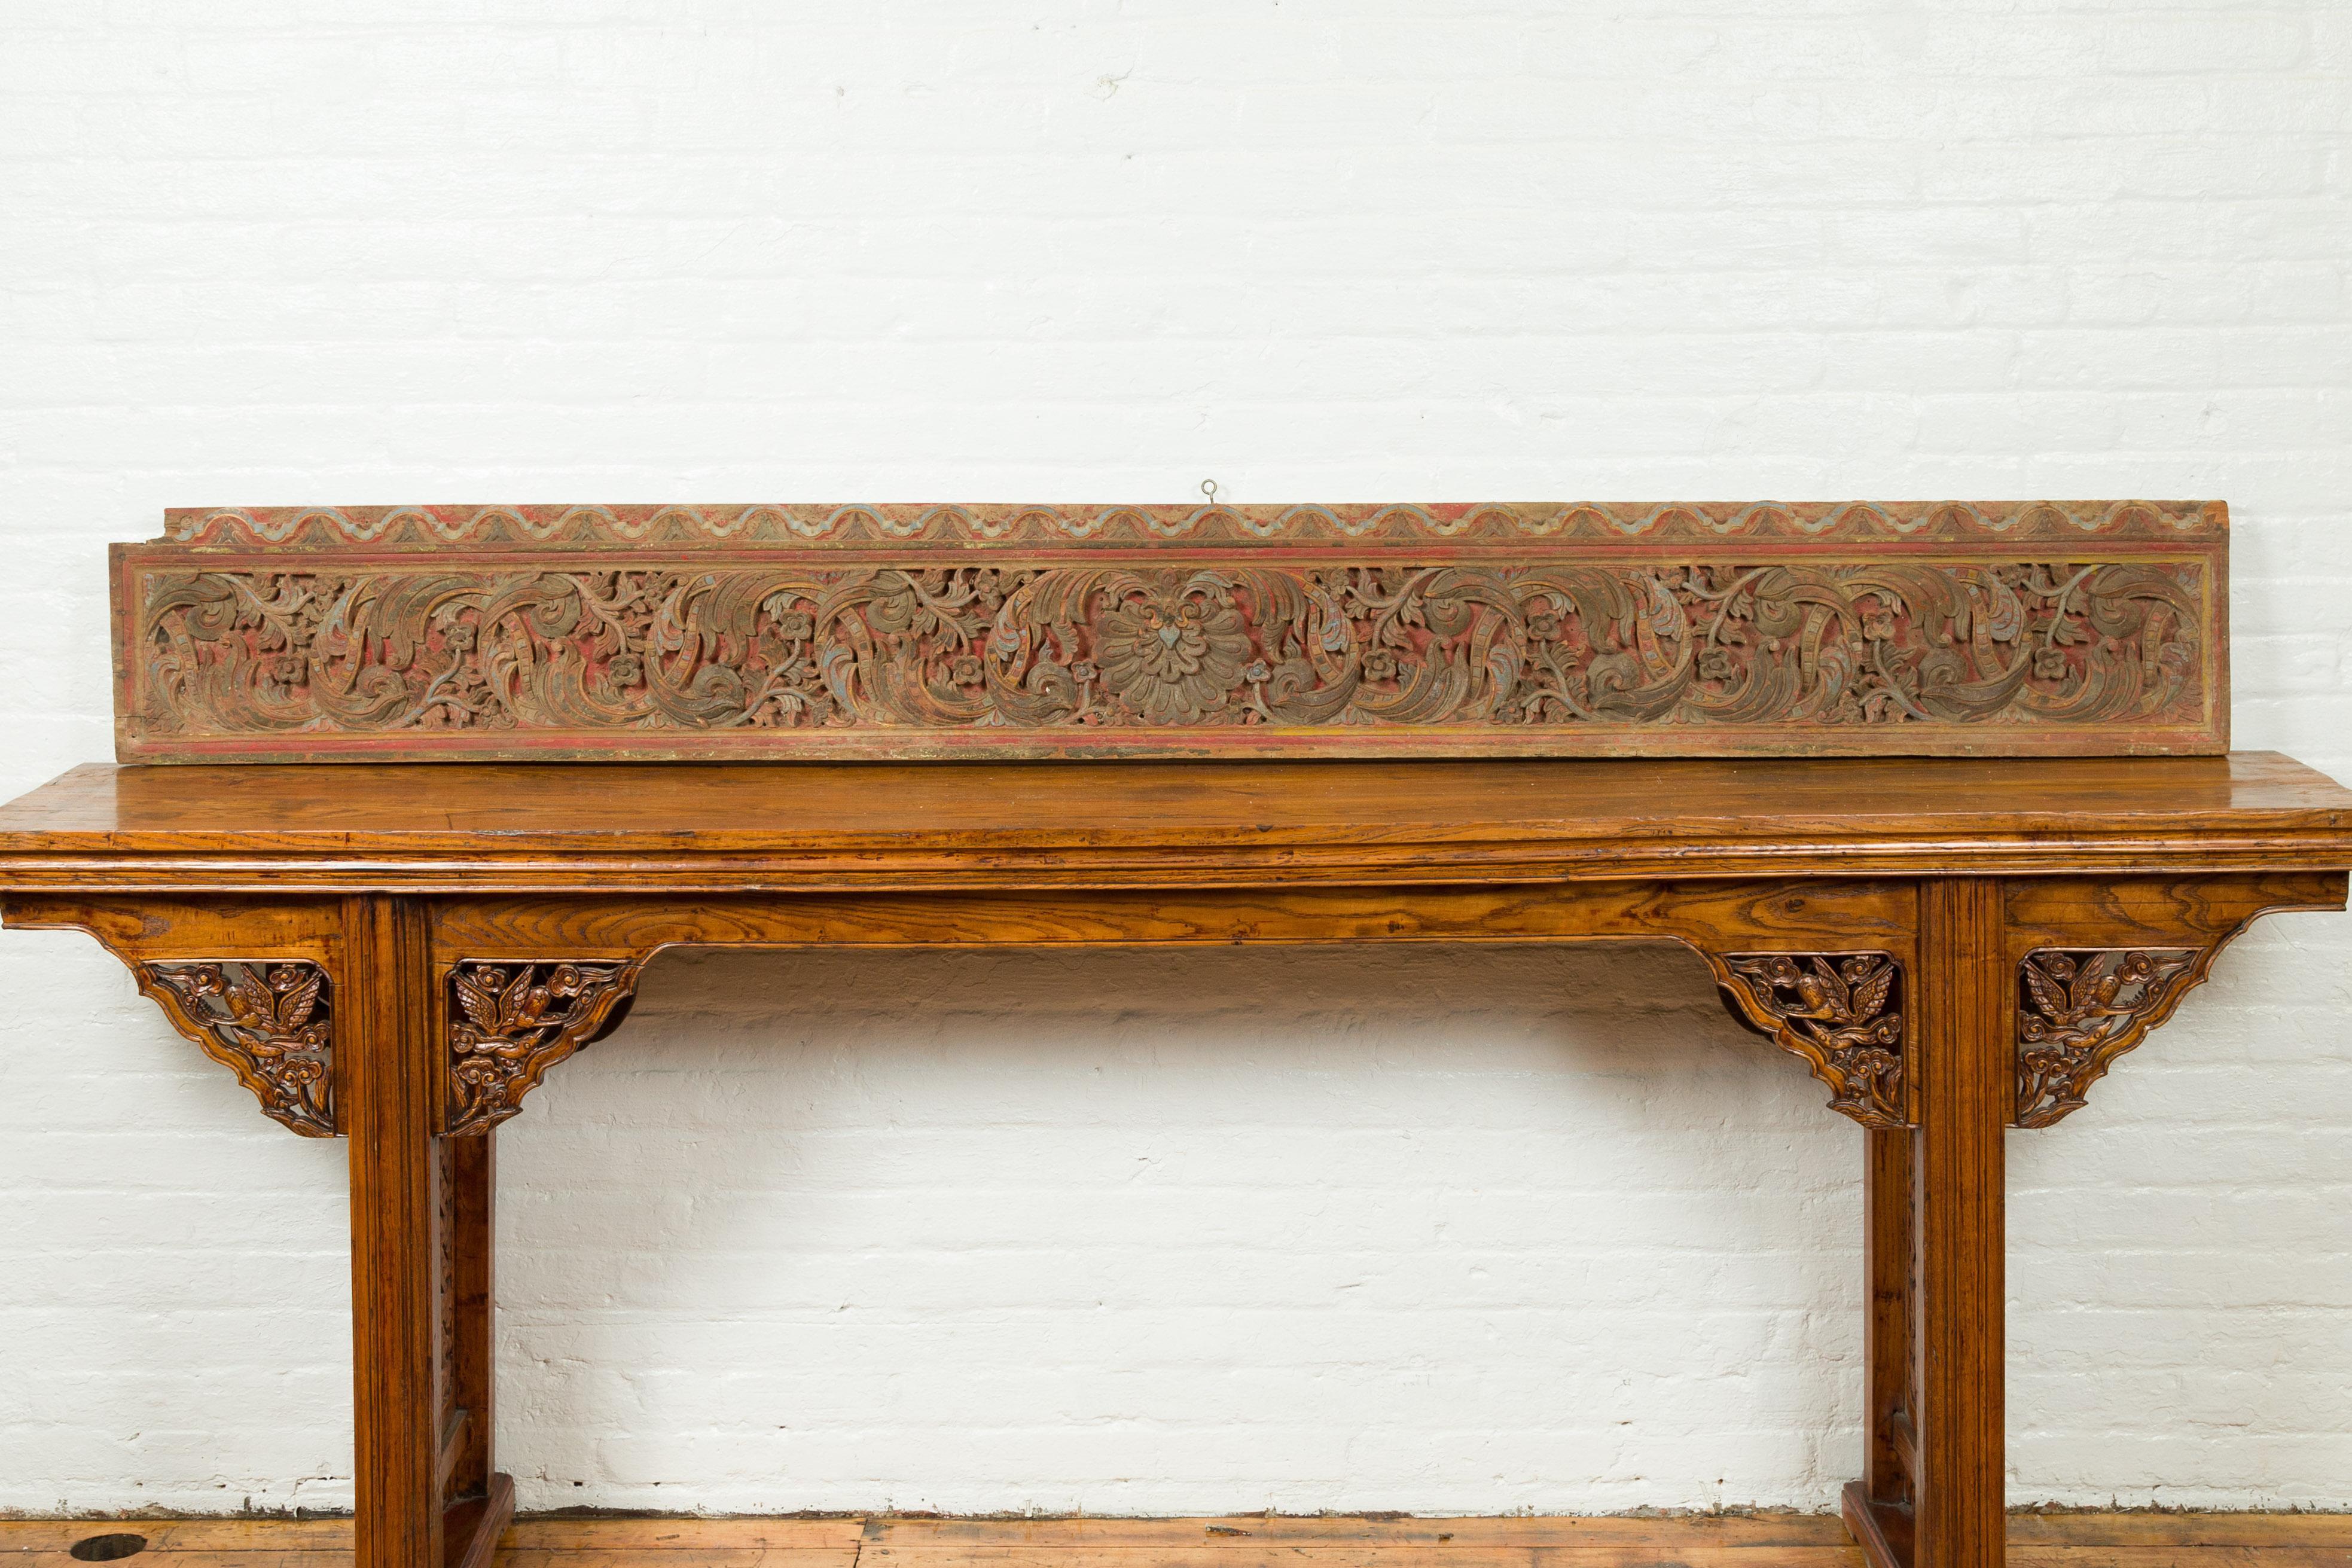 An antique Indonesian carved architectural fragment from a temple, with raised floral motifs. Created in Indonesia for a temple decor, this horizontal architectural panel features a frieze of scrolling rinceaux perfectly accented with green, red and